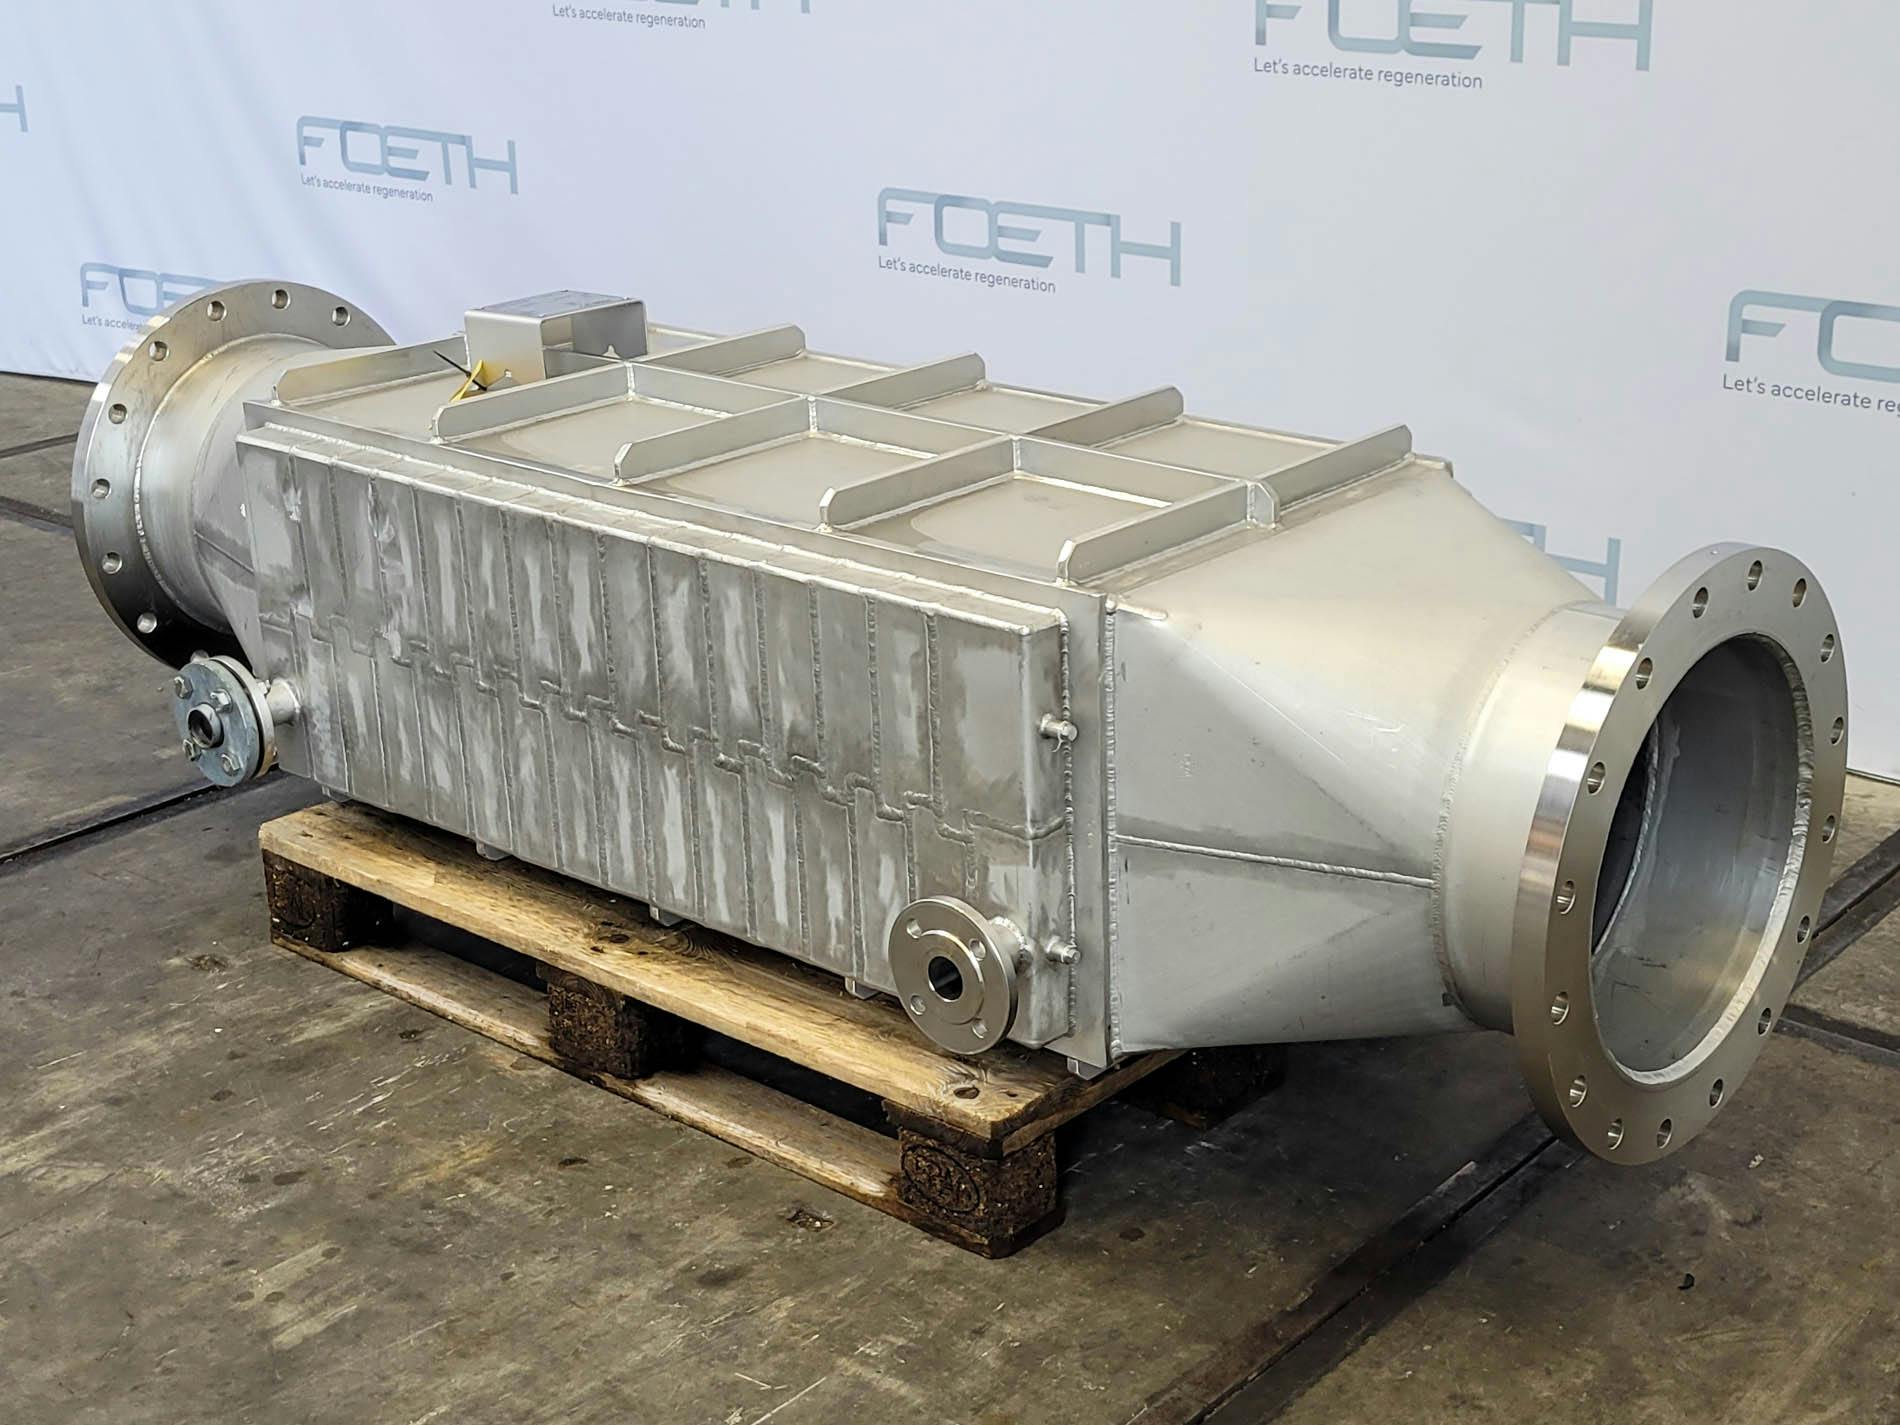 Enco "Finned / Rippenrohr" - Shell and tube heat exchanger - image 2